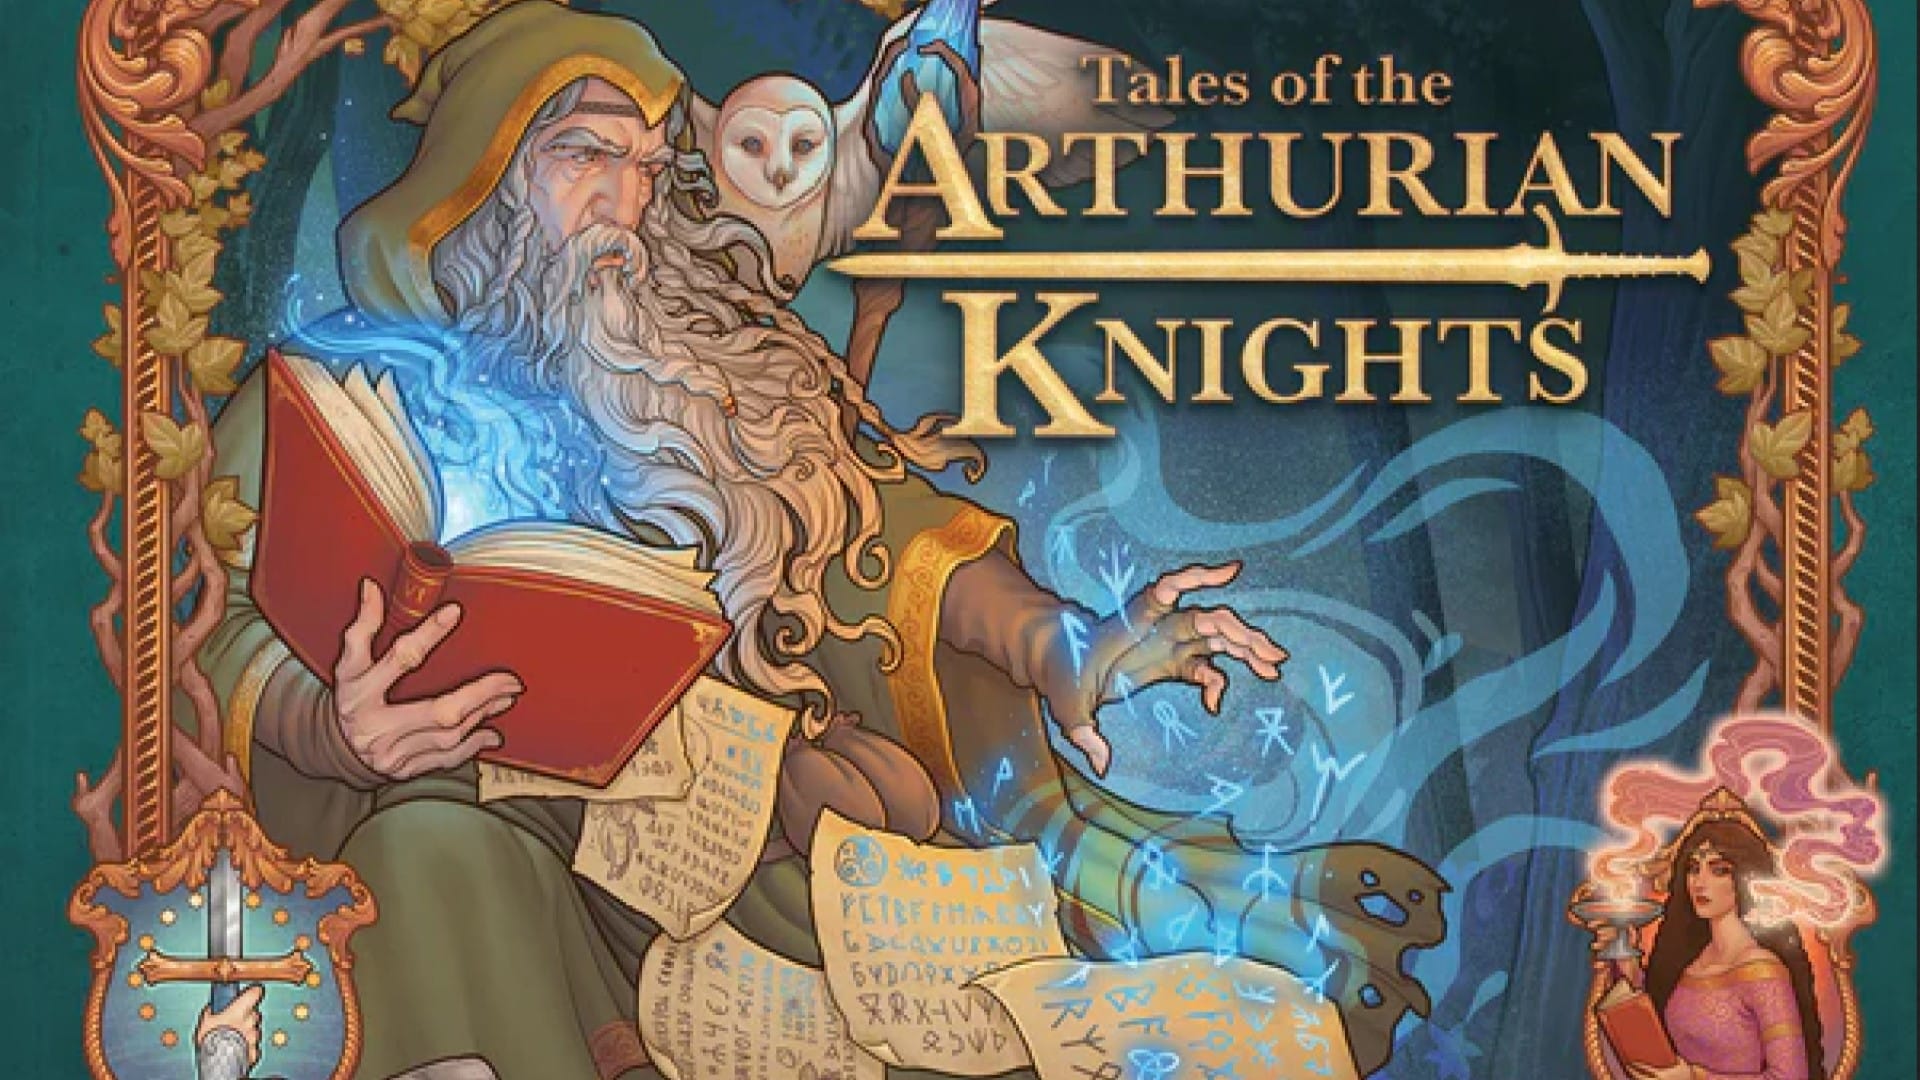 Box art of Tales of the Arthurian Knights, showing Merlin with an open spell book, a snowy owl can be seen sitting on his shoulder.